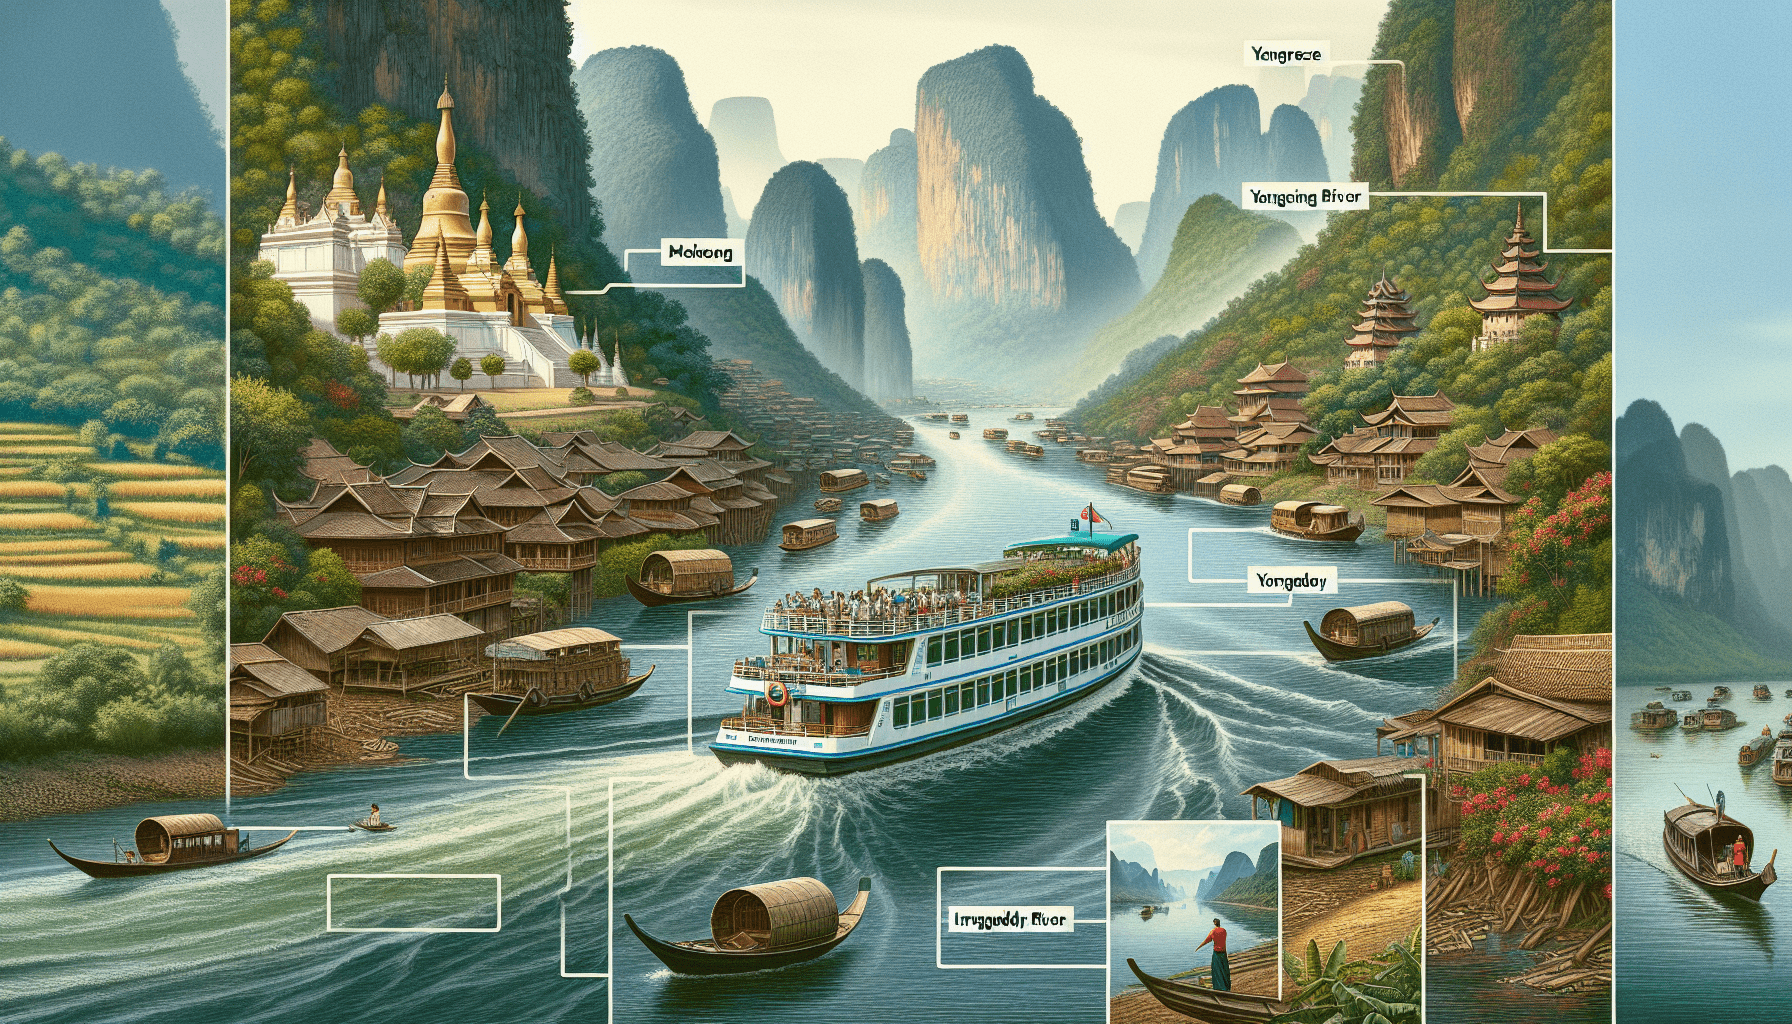 Are There River Cruises In Asia?